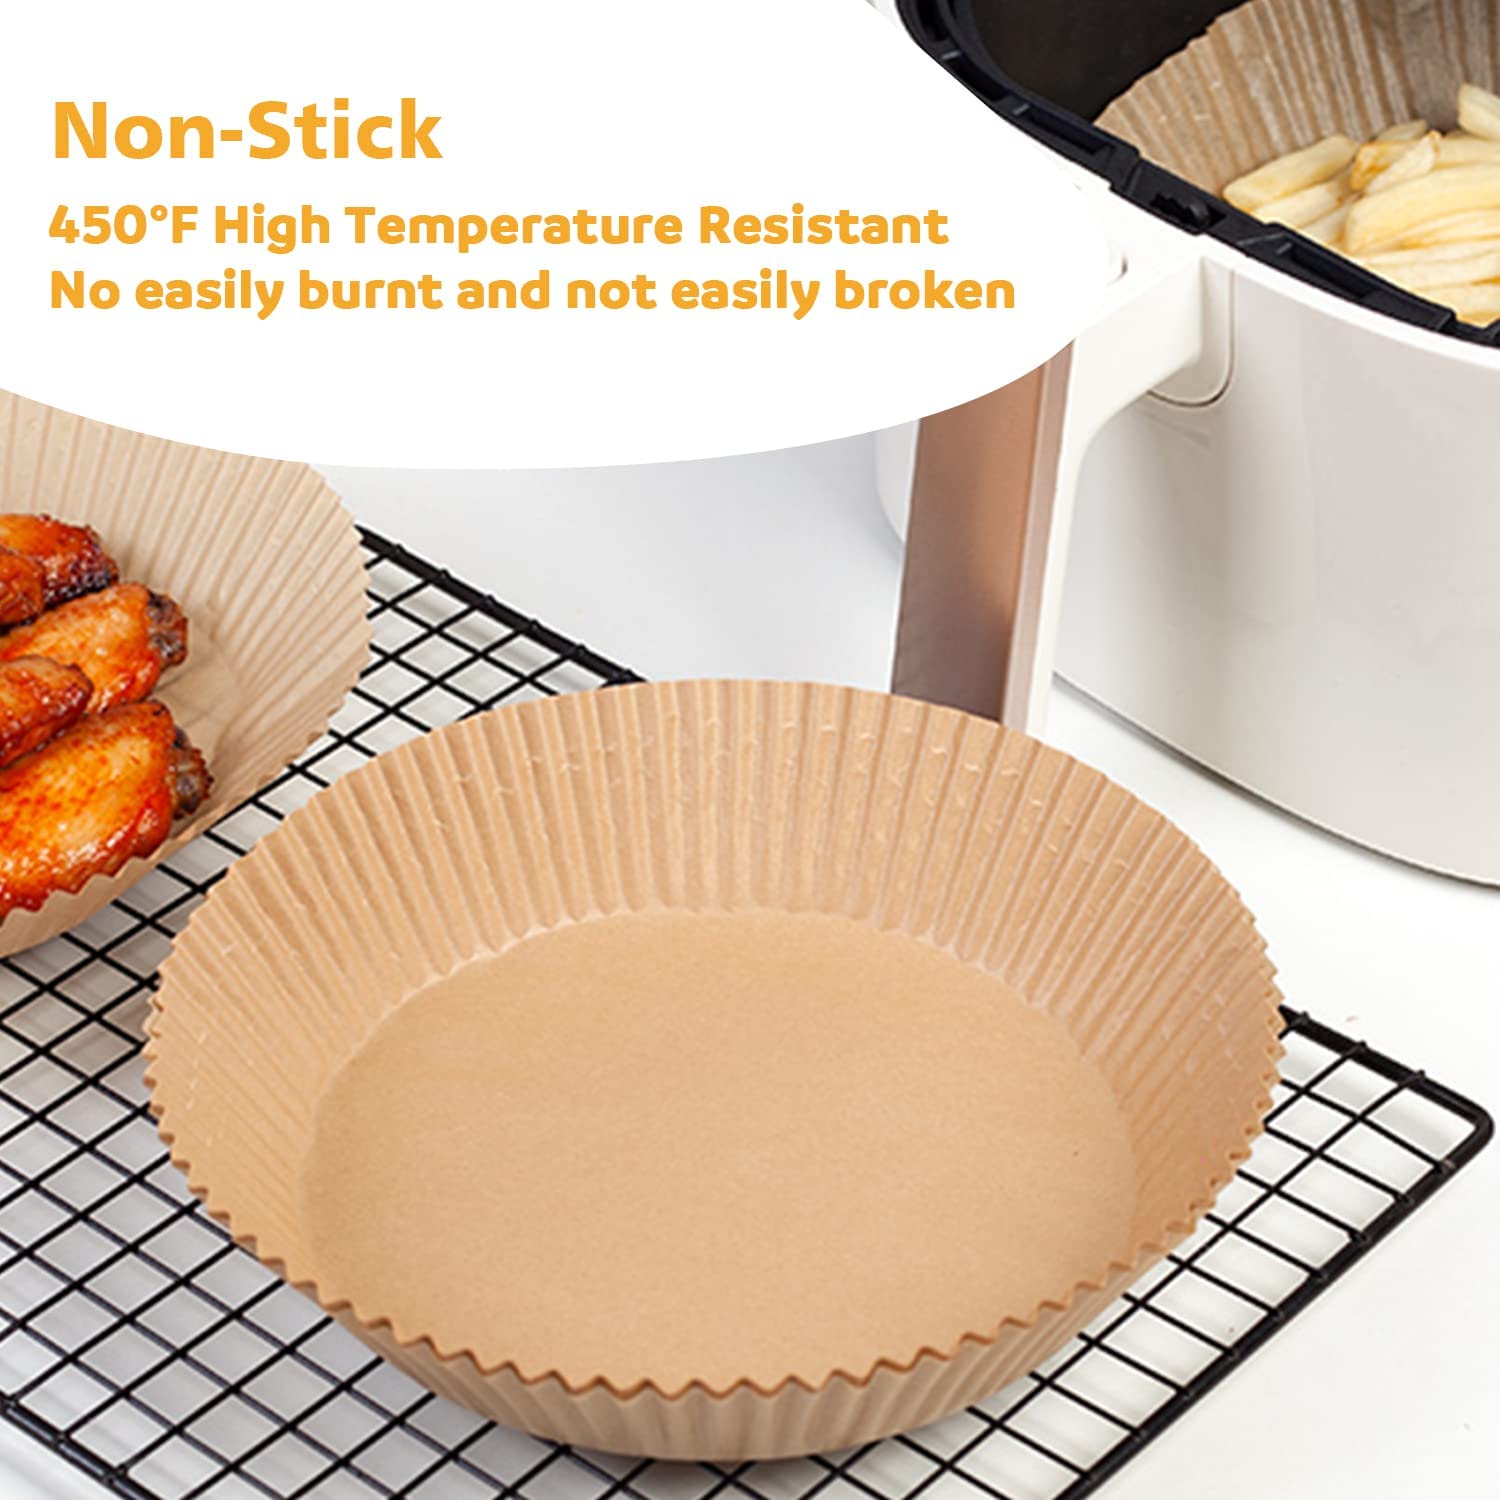 Ailun Air Fryer Paper Liners 8inch, 100PCS Non-Stick Parchment Paper,Oil Resistant,Disposable Food Grade Free of Bleach Paper Round for 5-8 QT Air Fryer Baking Roasting Microwave